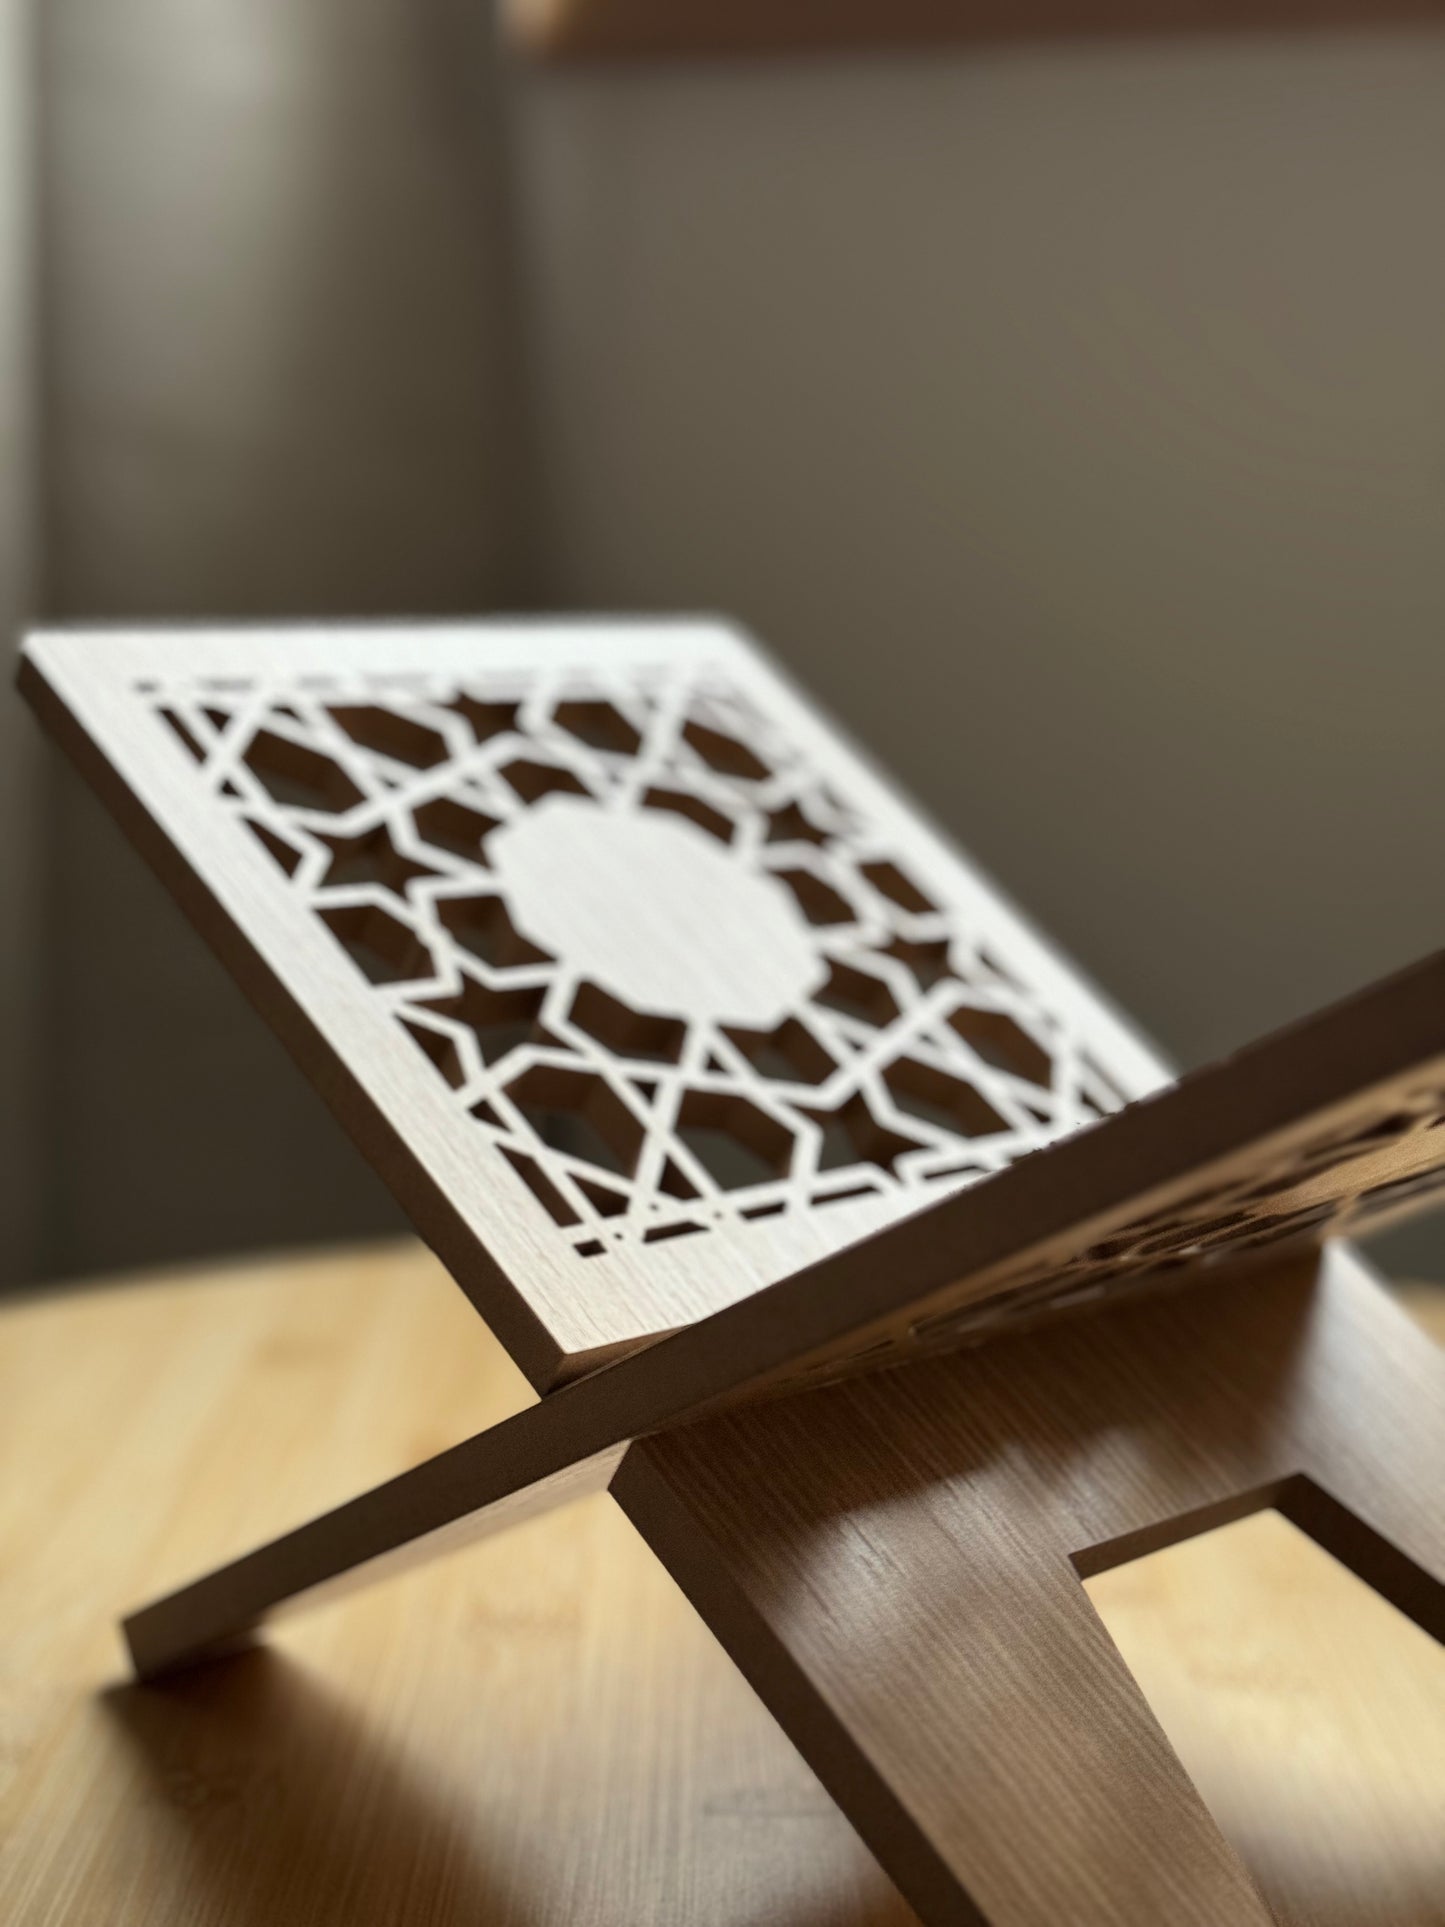 Quran stand